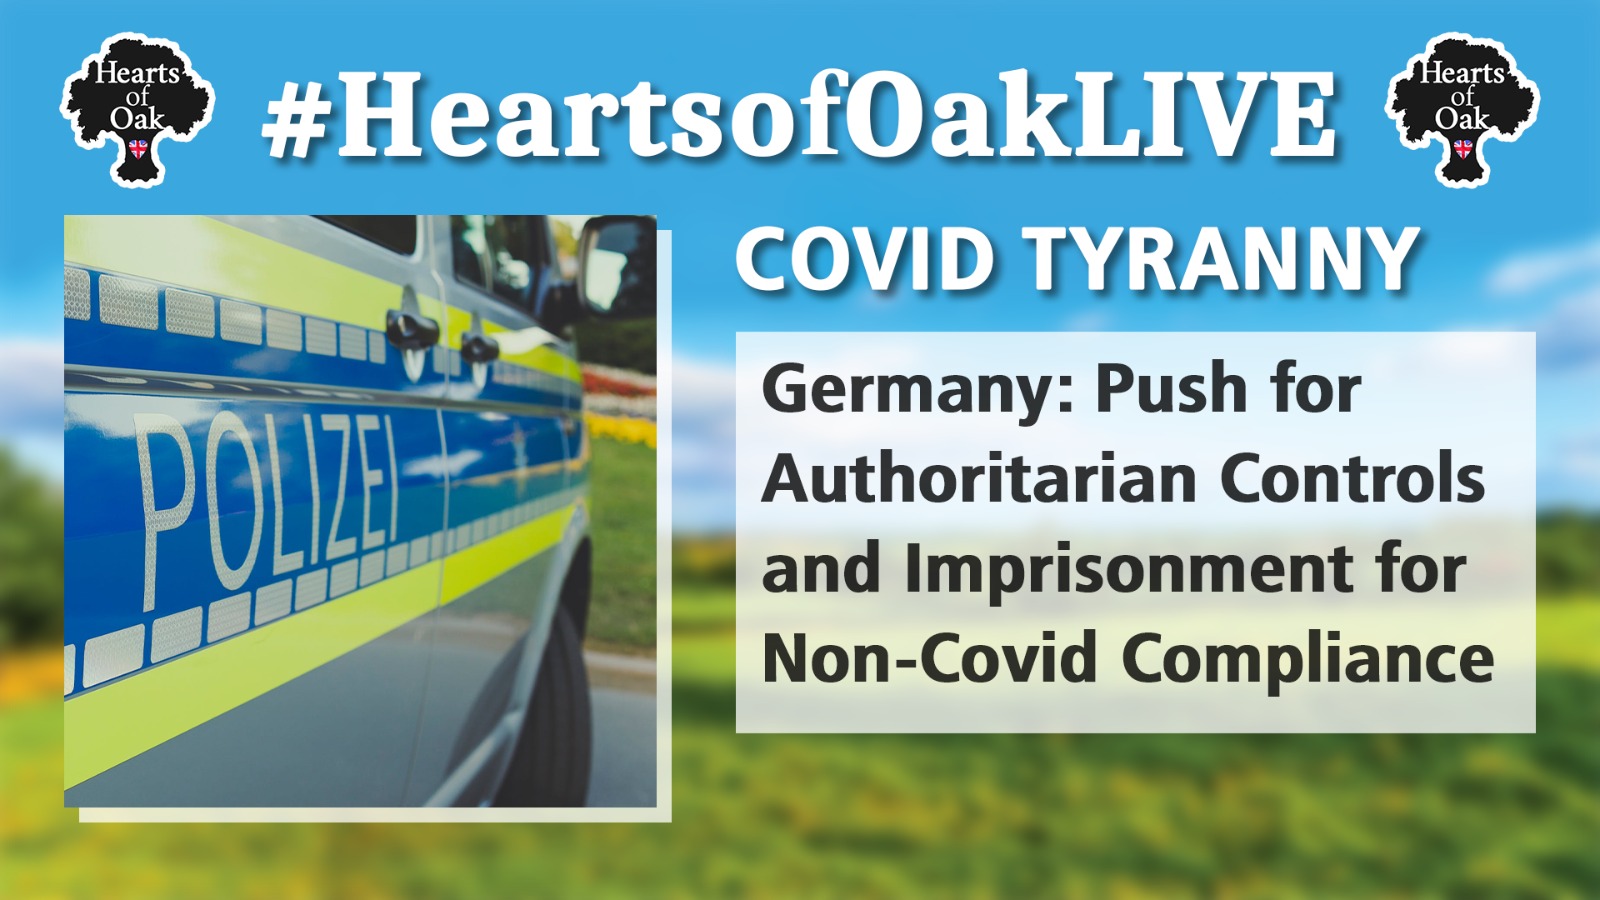 Germany: Push for Authoritarian Controls and Imprisonment for non-covid Compliance